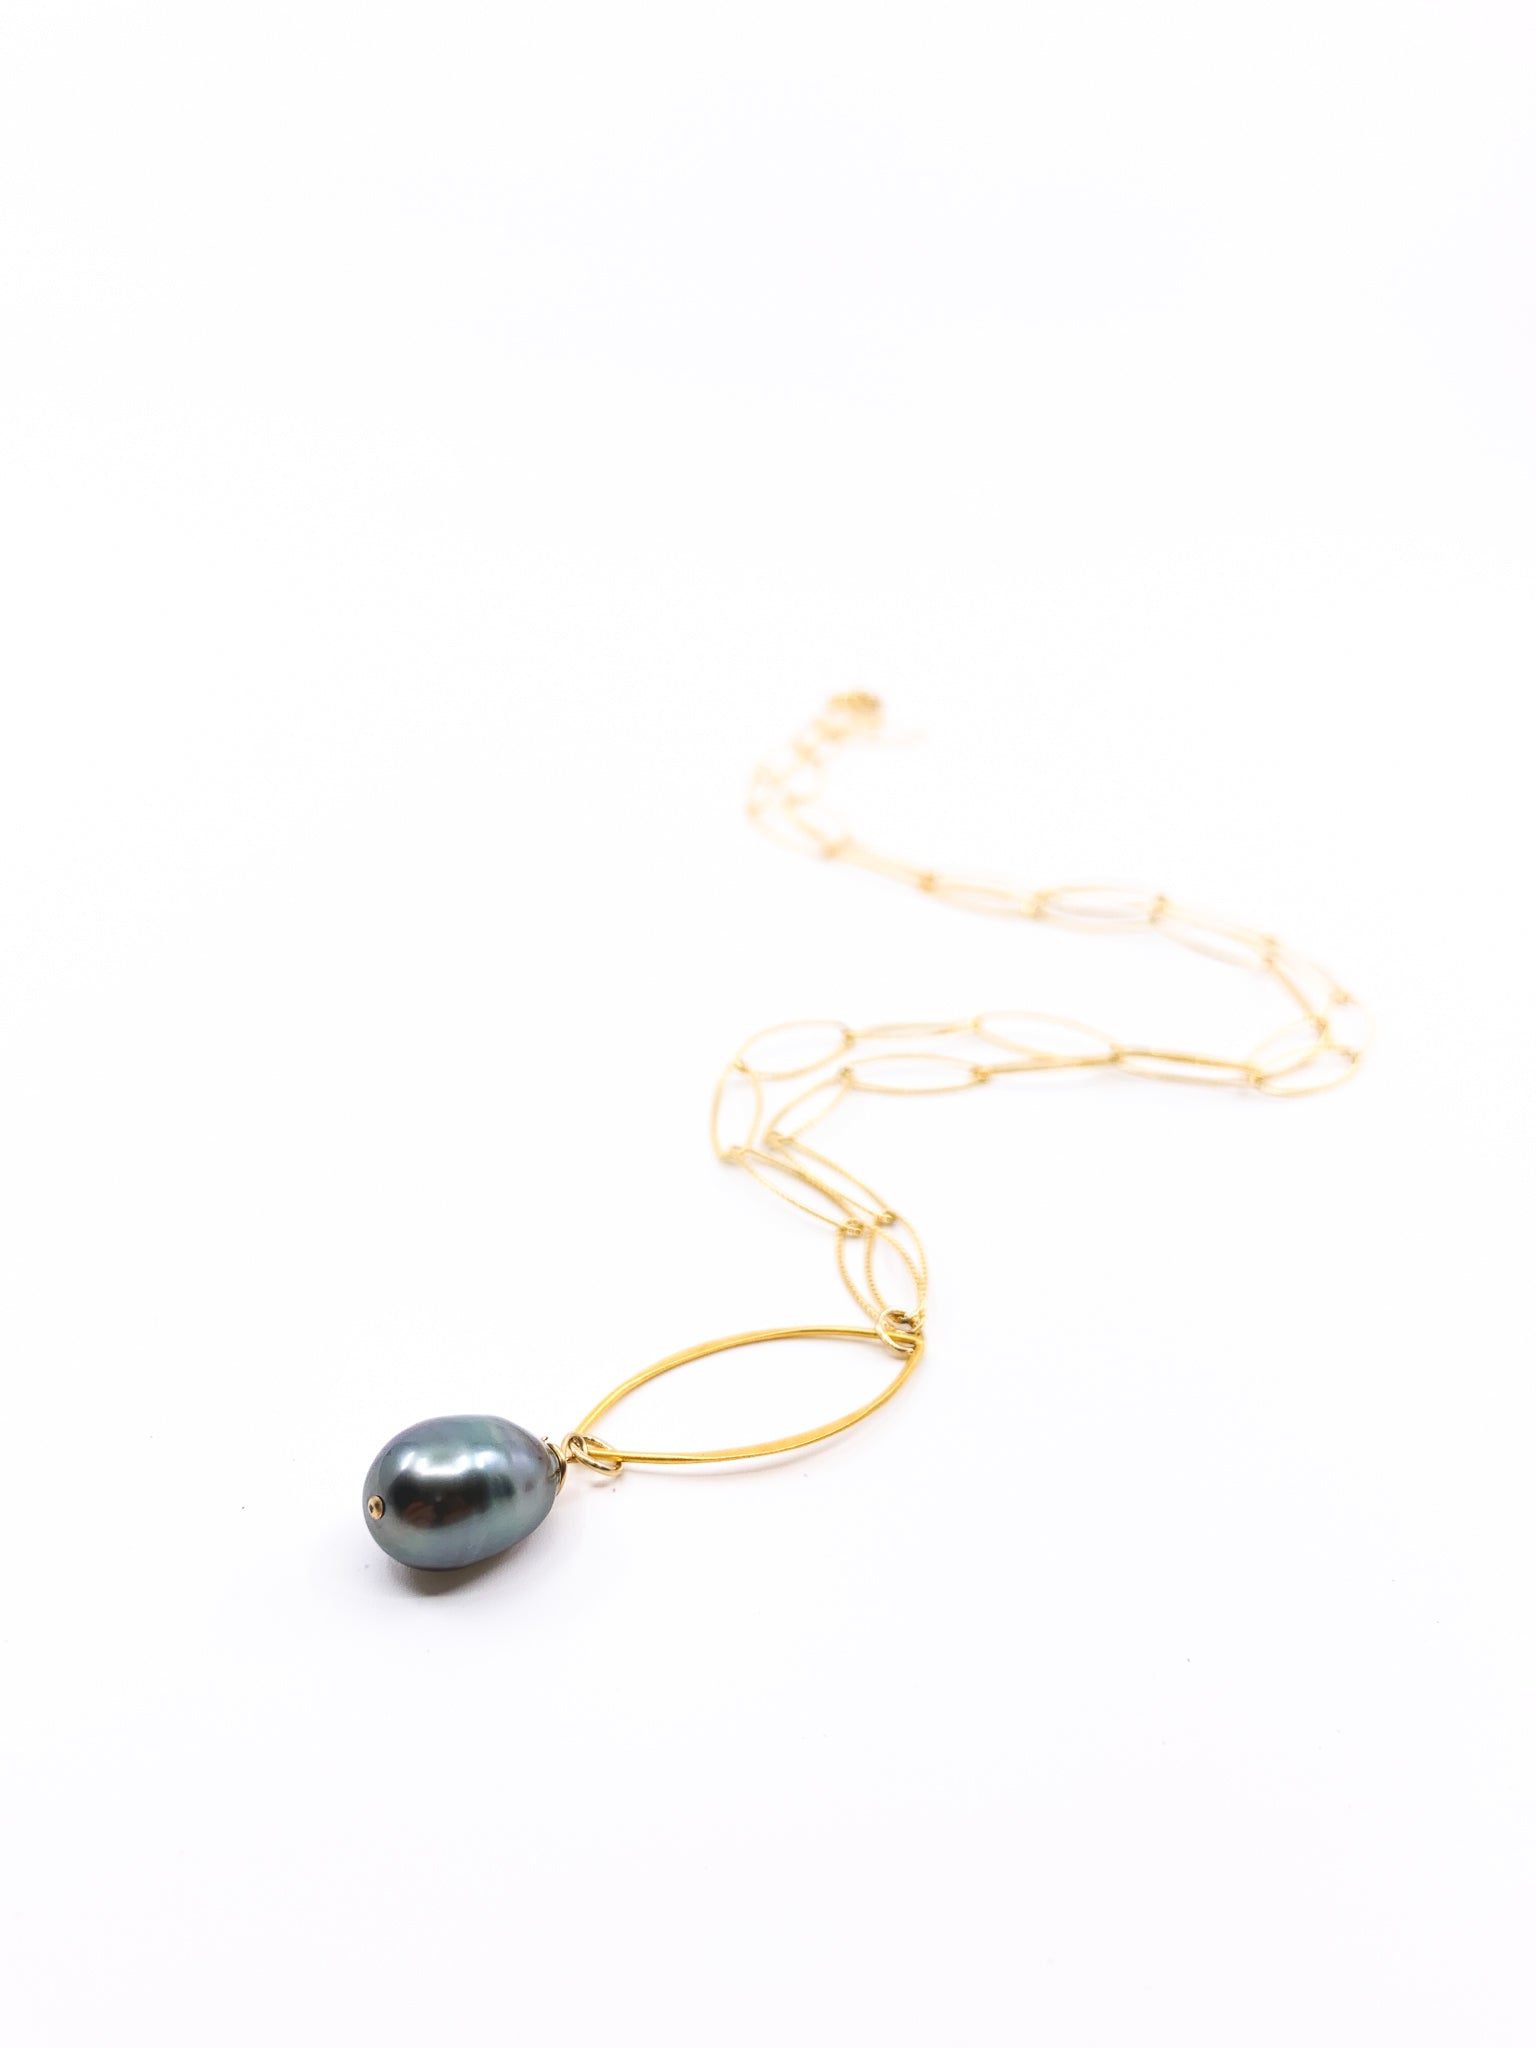 Tahitian pearl marquee style chain necklace by eve black jewelry made in hawaii